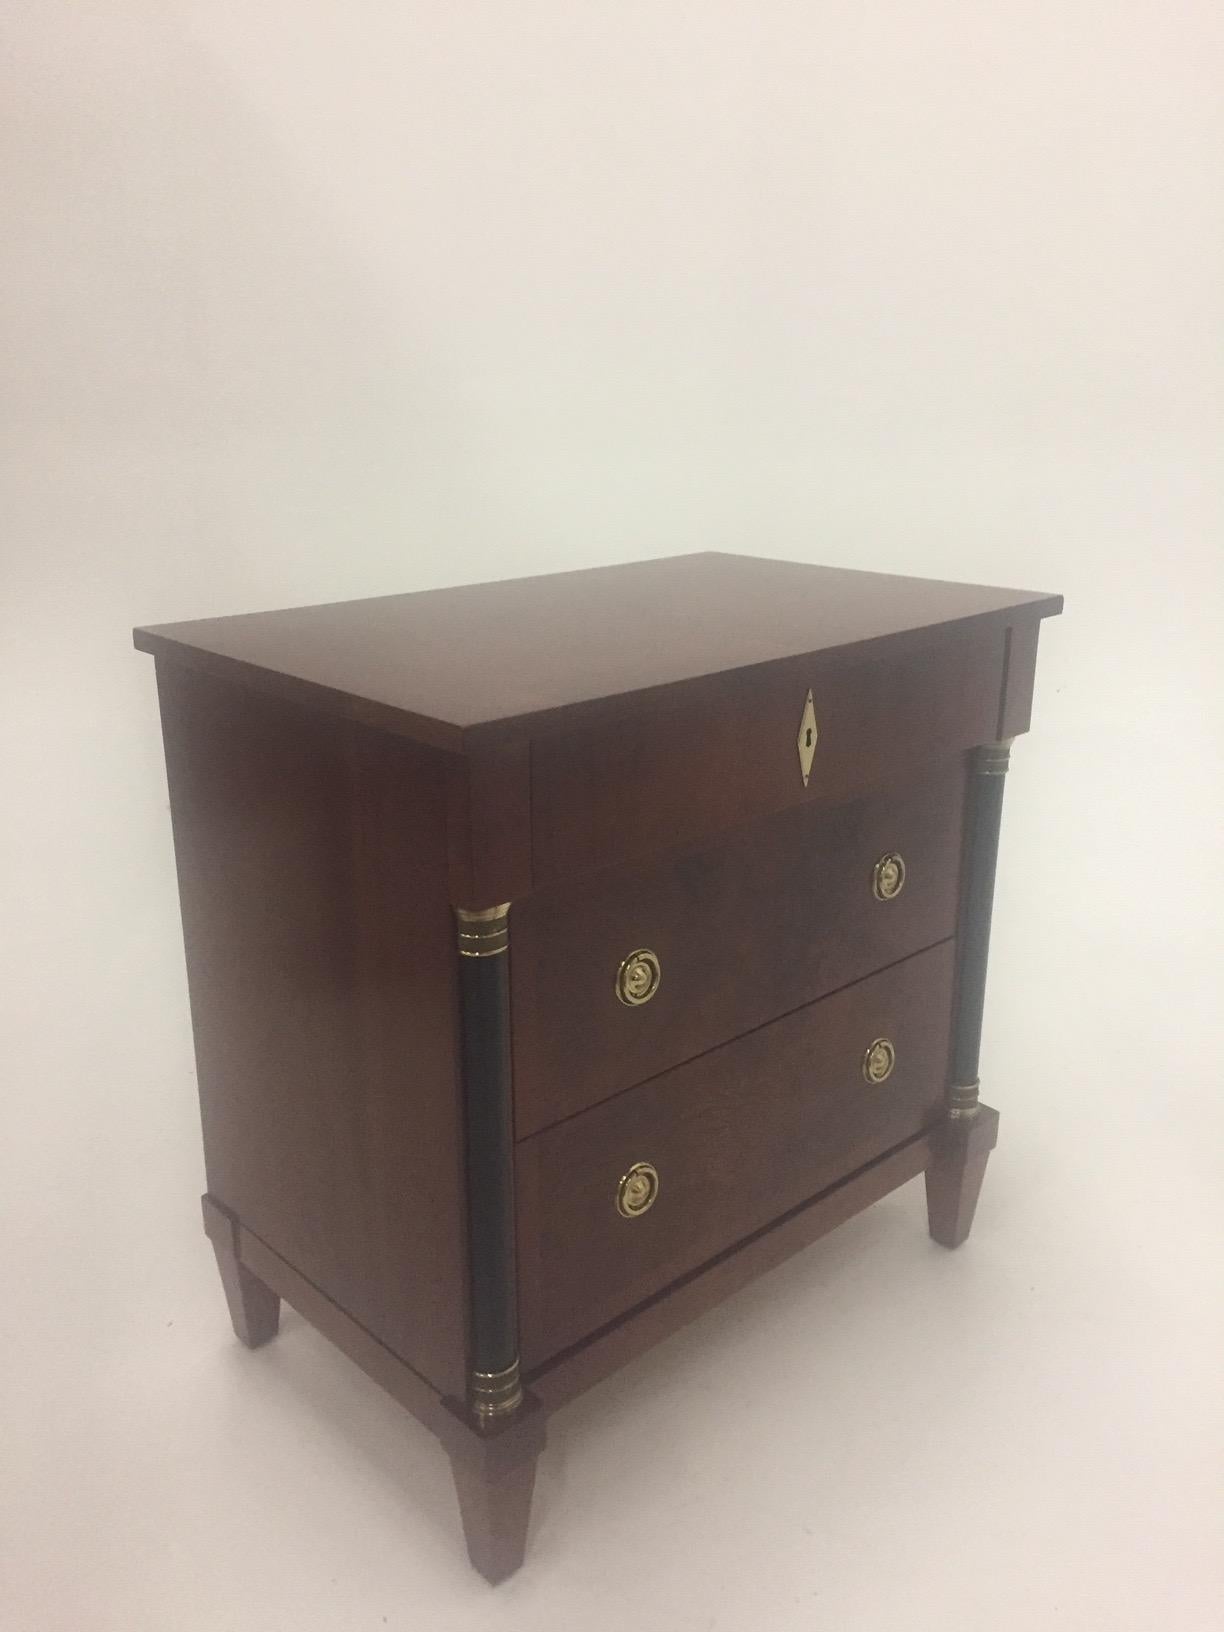 Mahogany Empire Style Small Chest of Drawers Commode For Sale 2